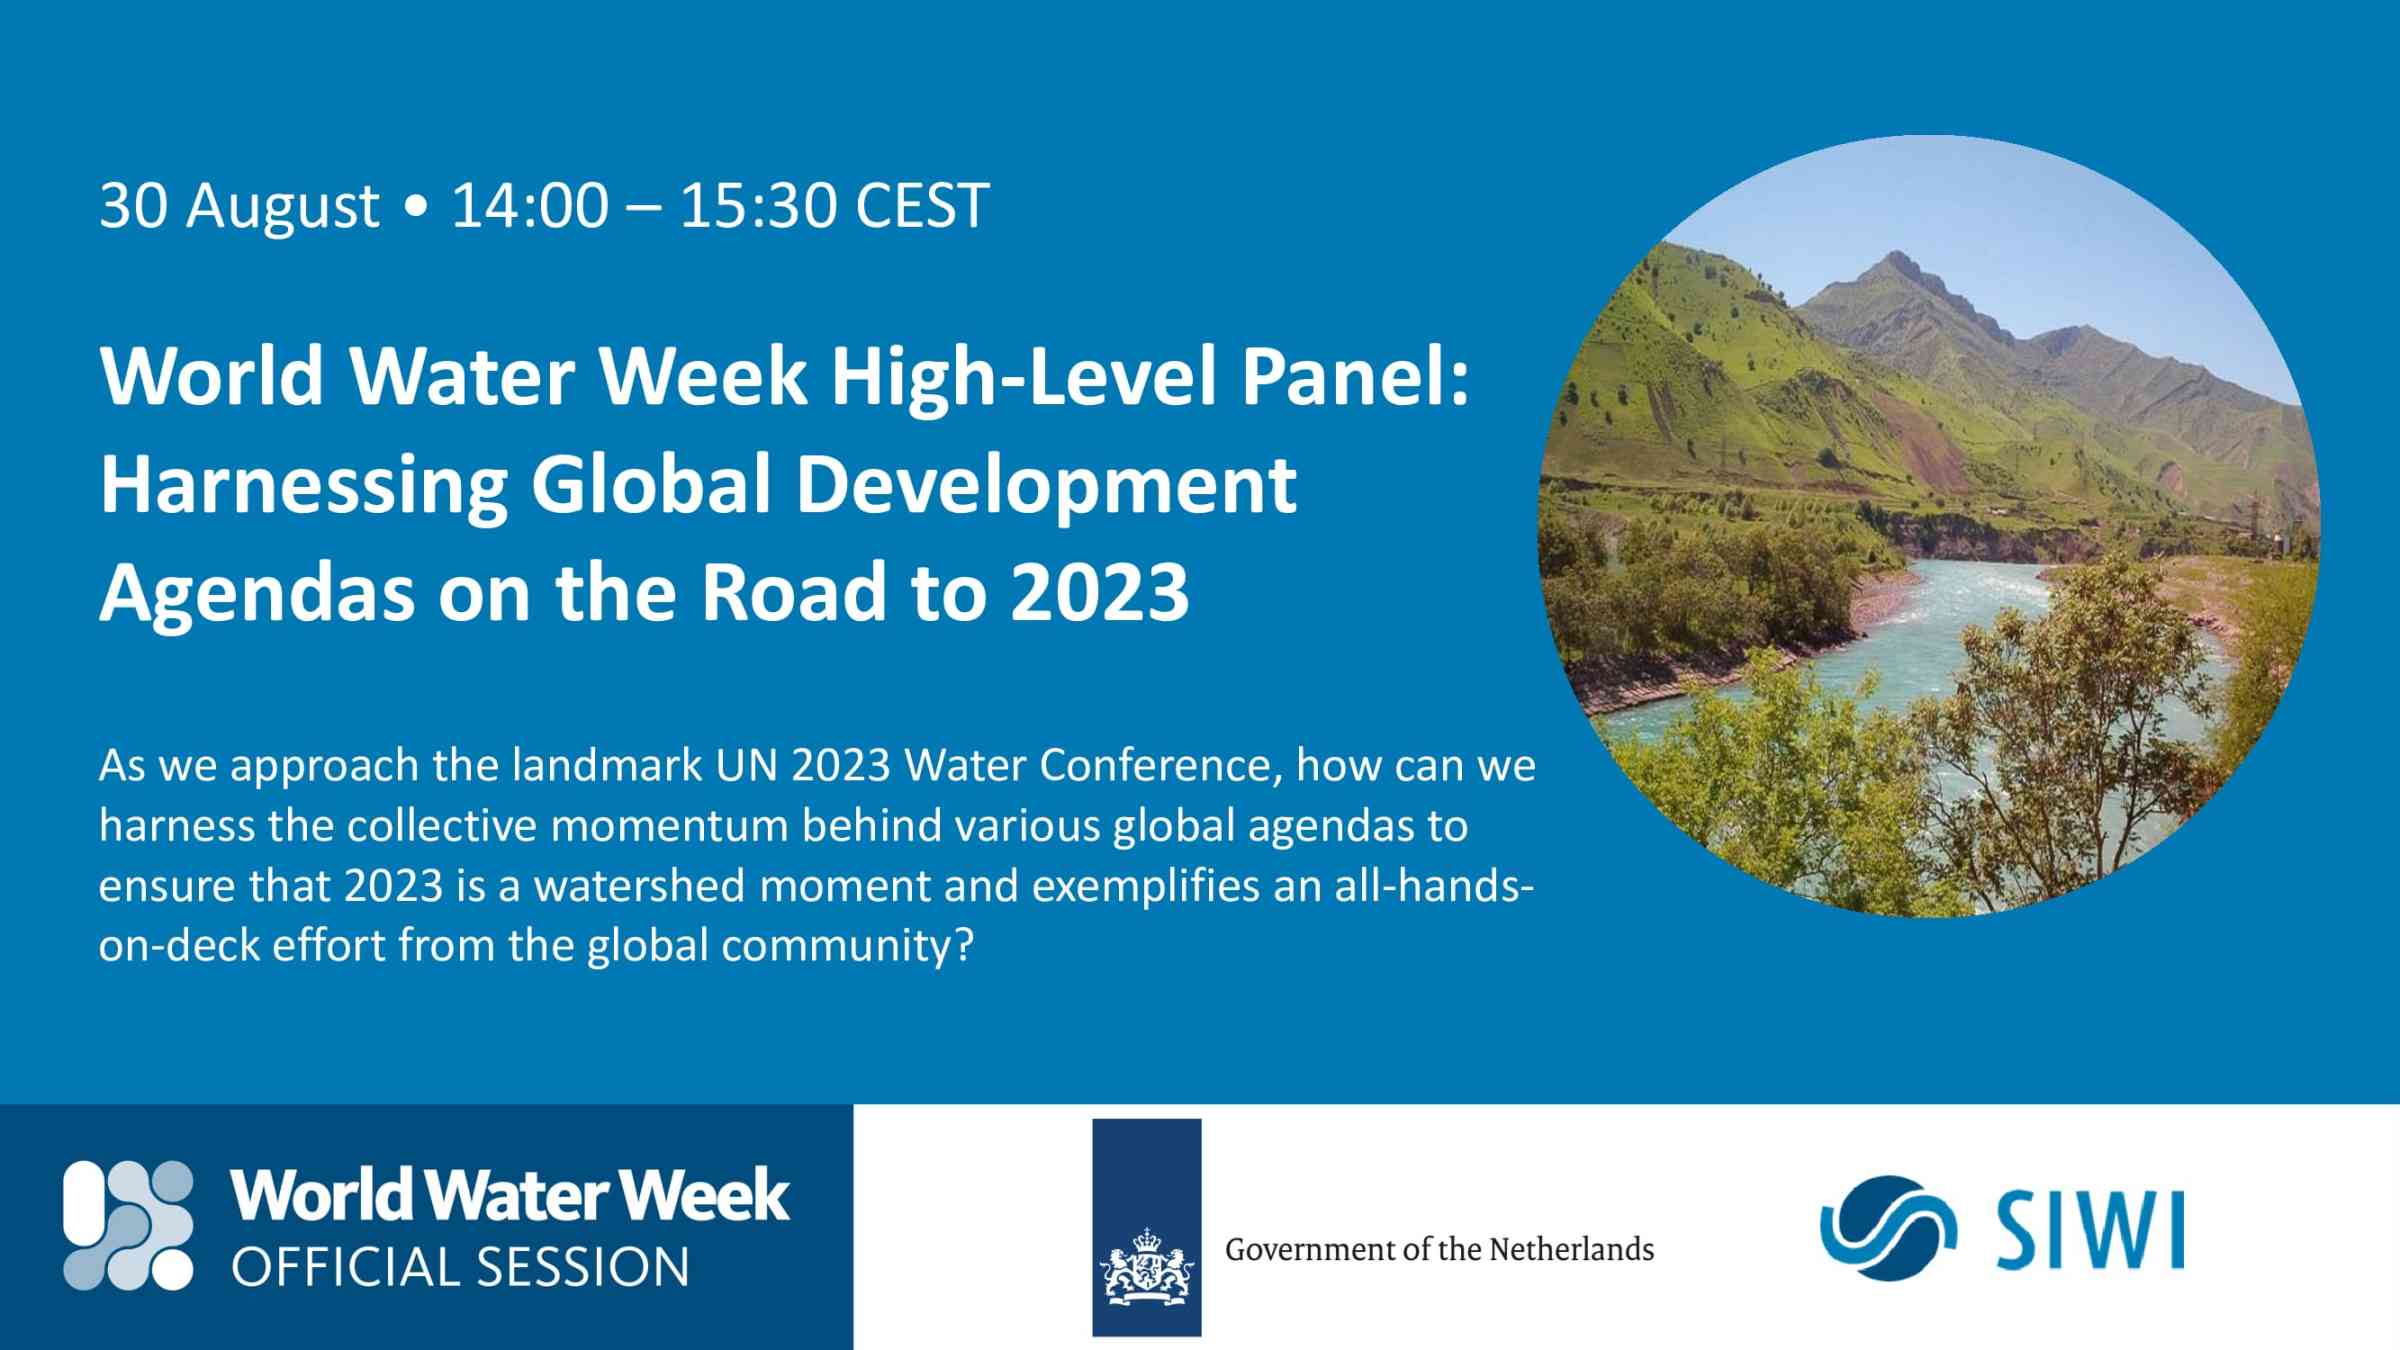 Harnessing Global Development Agendas on the Road to 2023